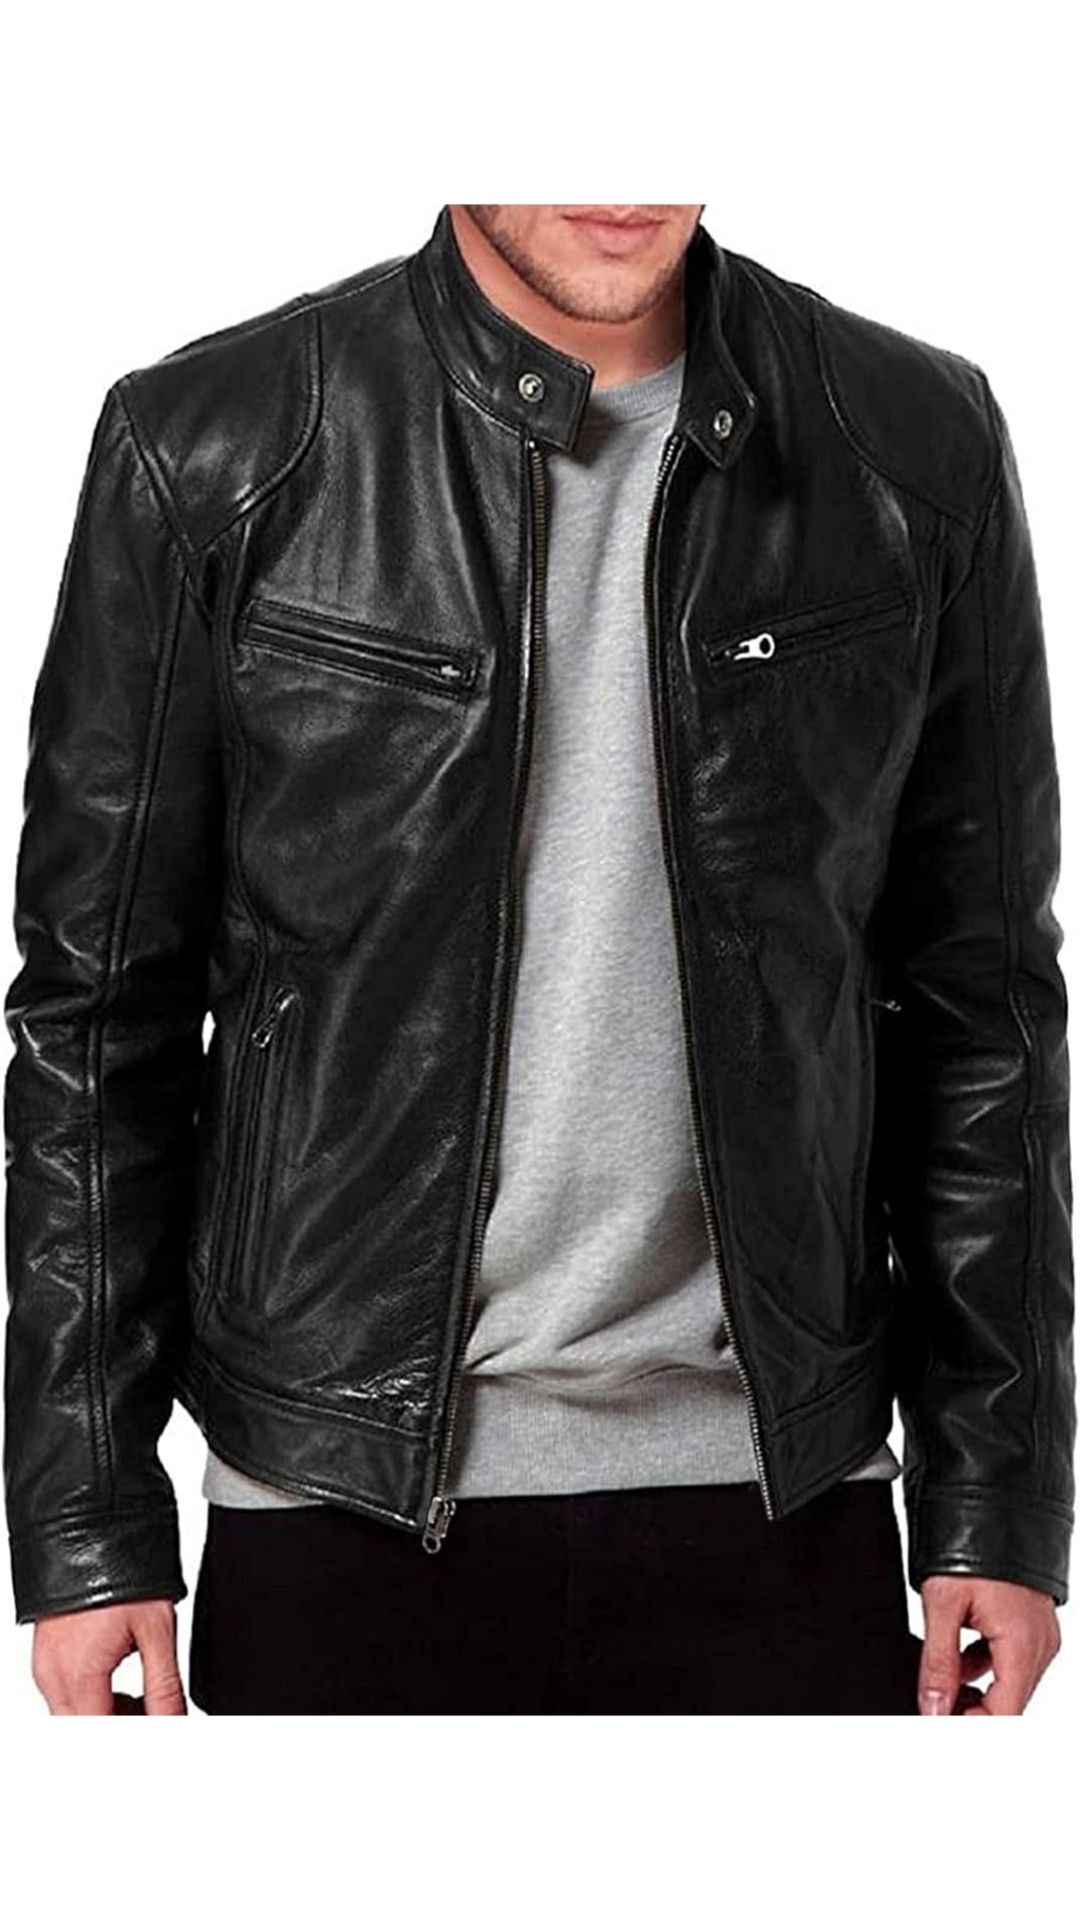 Leather Jacket NYC: Elevating Urban Style with Timeless Sophistication